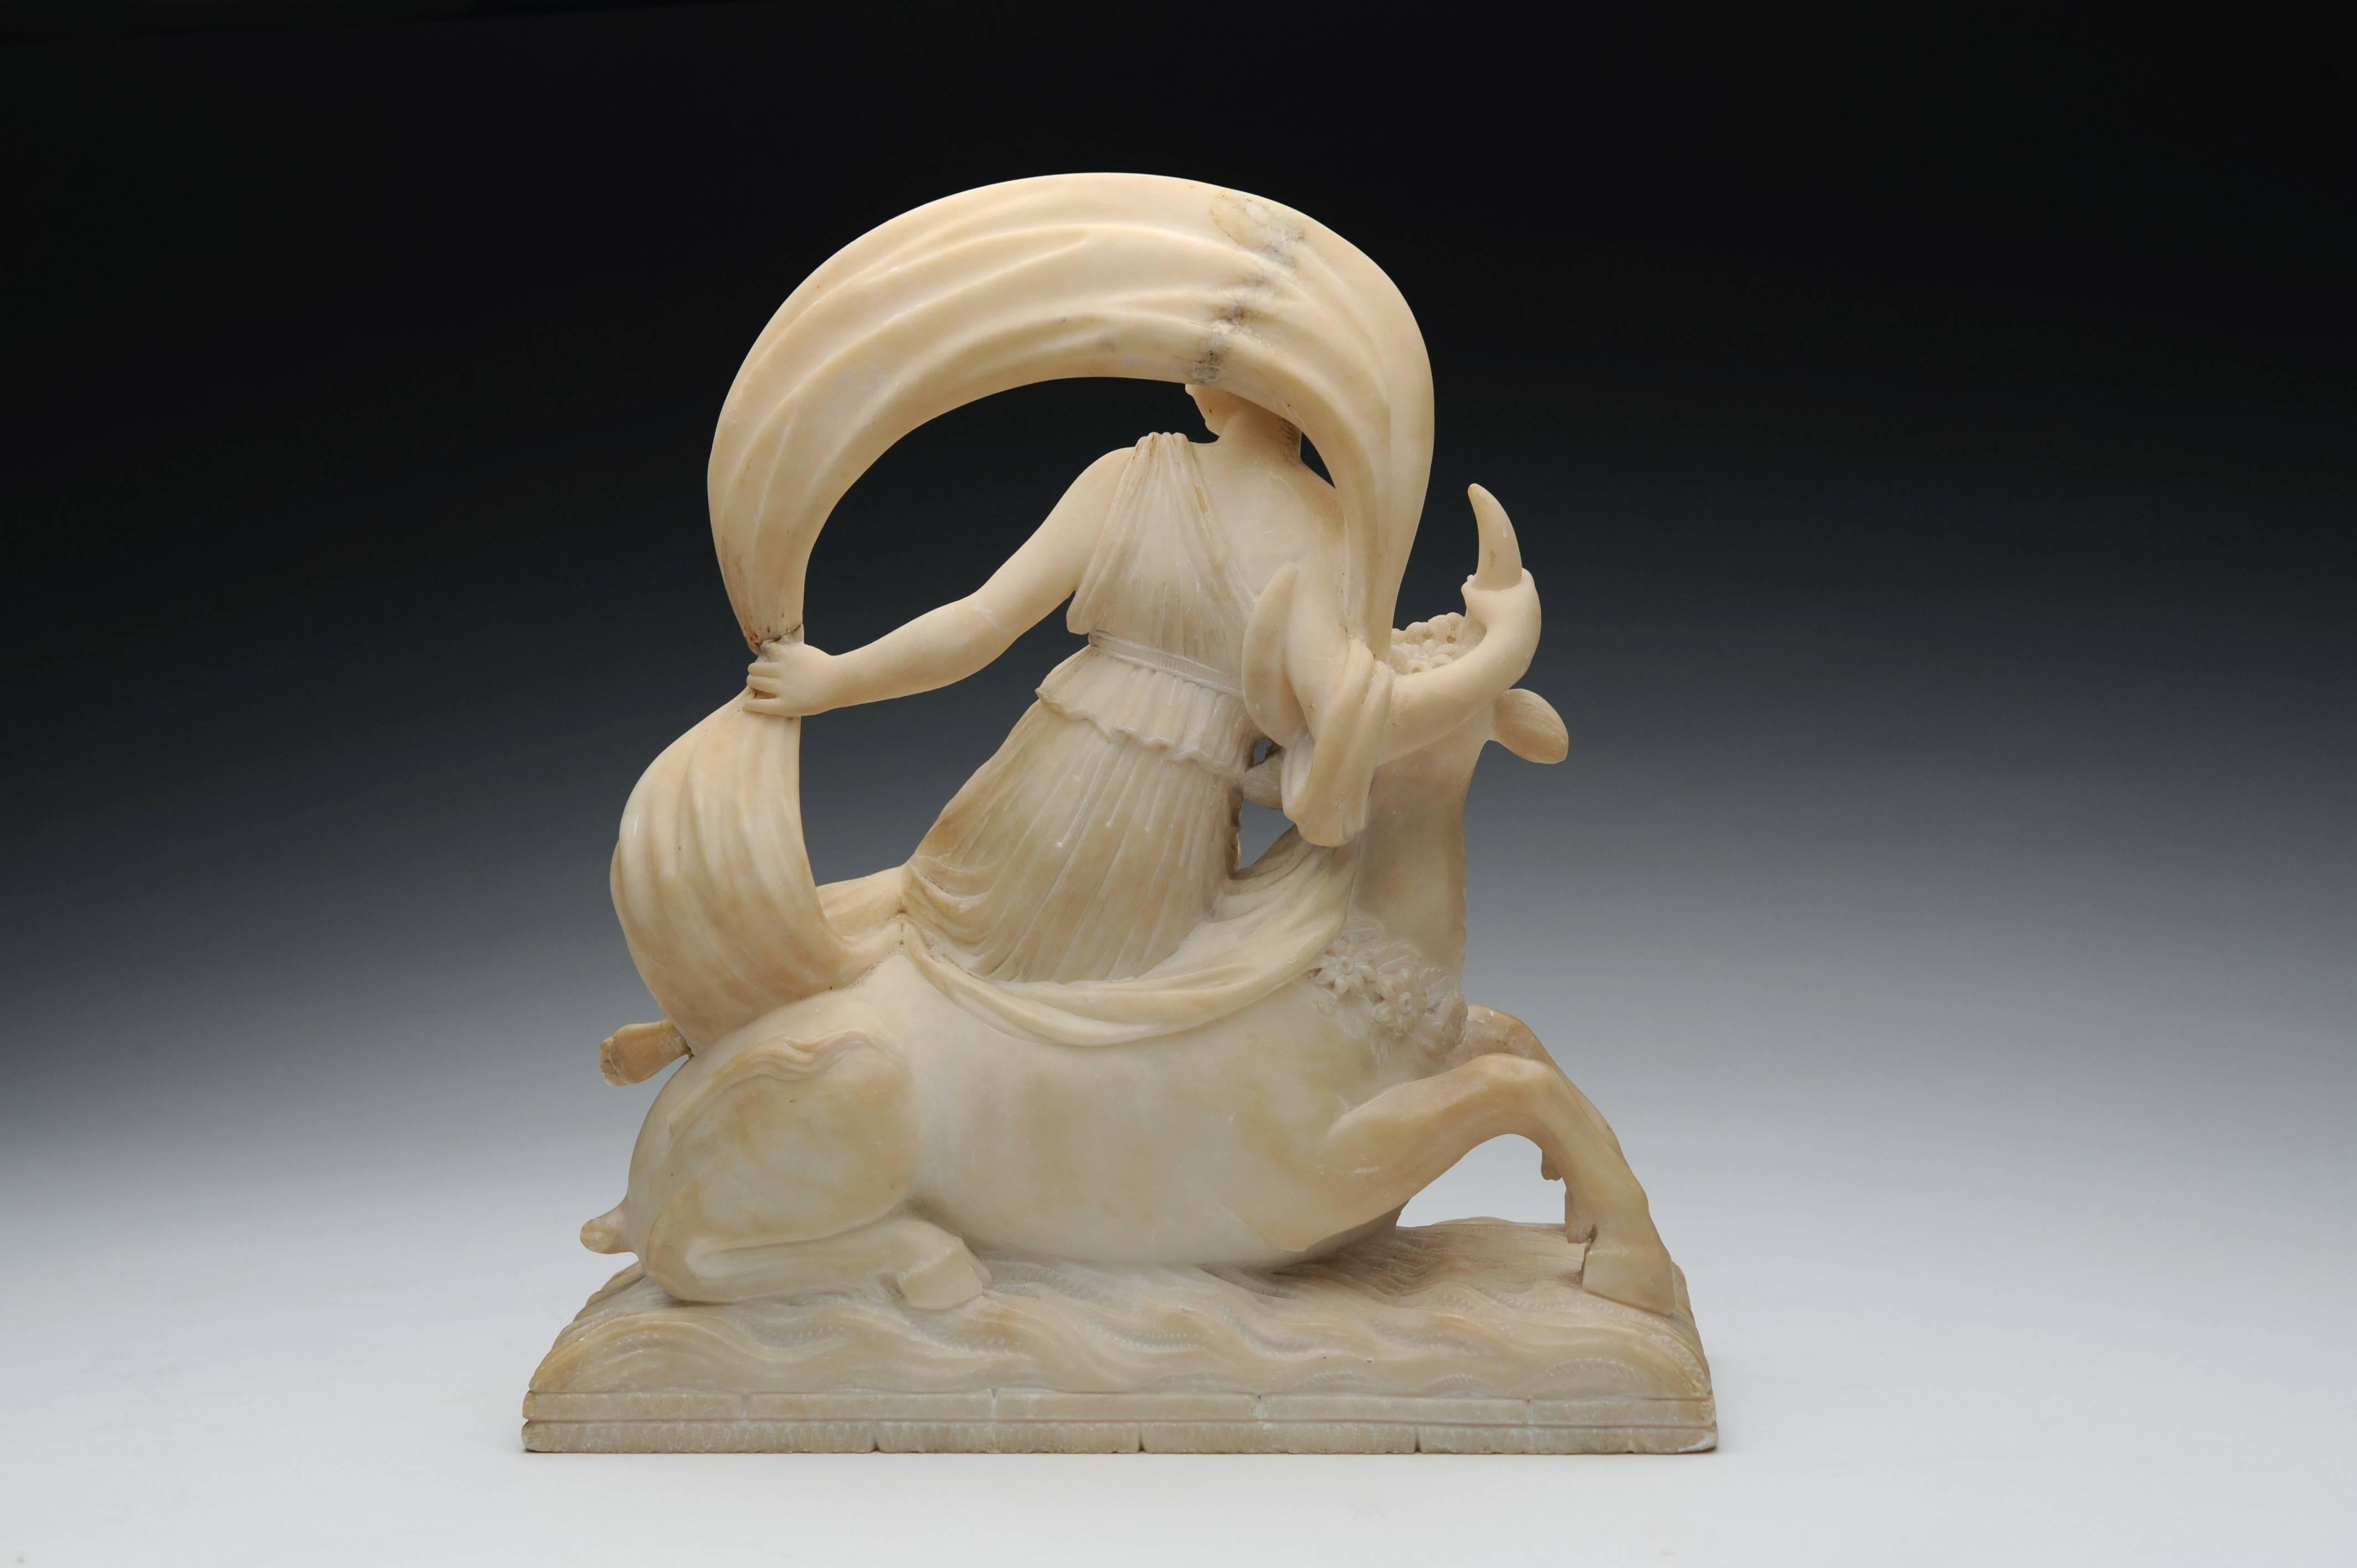 19th century Alabaster Biedermeier sculpture of Europa and the bull, circa 1830
Measures: 11 in.H x 10.6 in.W x 3.6 in.D 
28 cm H x 27 cm W x 9 cm D 

The mythographers tell that Zeus was enamored of Europa and decided to seduce or ravish her,